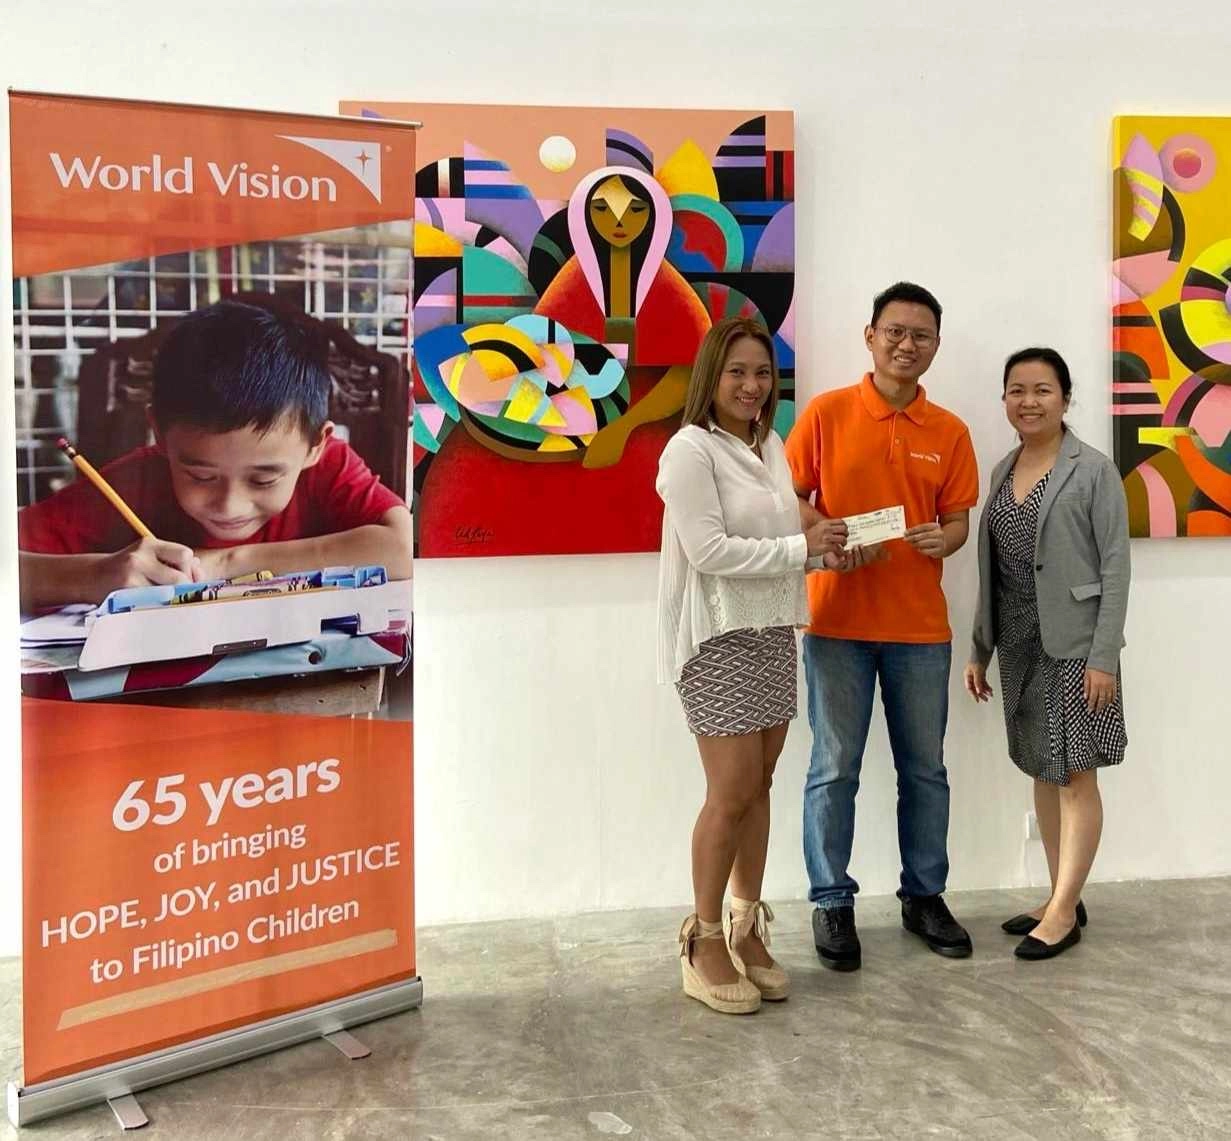 Cherry Fulgar of Imahica Art and Jayne Cauilan of Espacio Diseño proudly turned over the funds raised for the benefit of World Vision